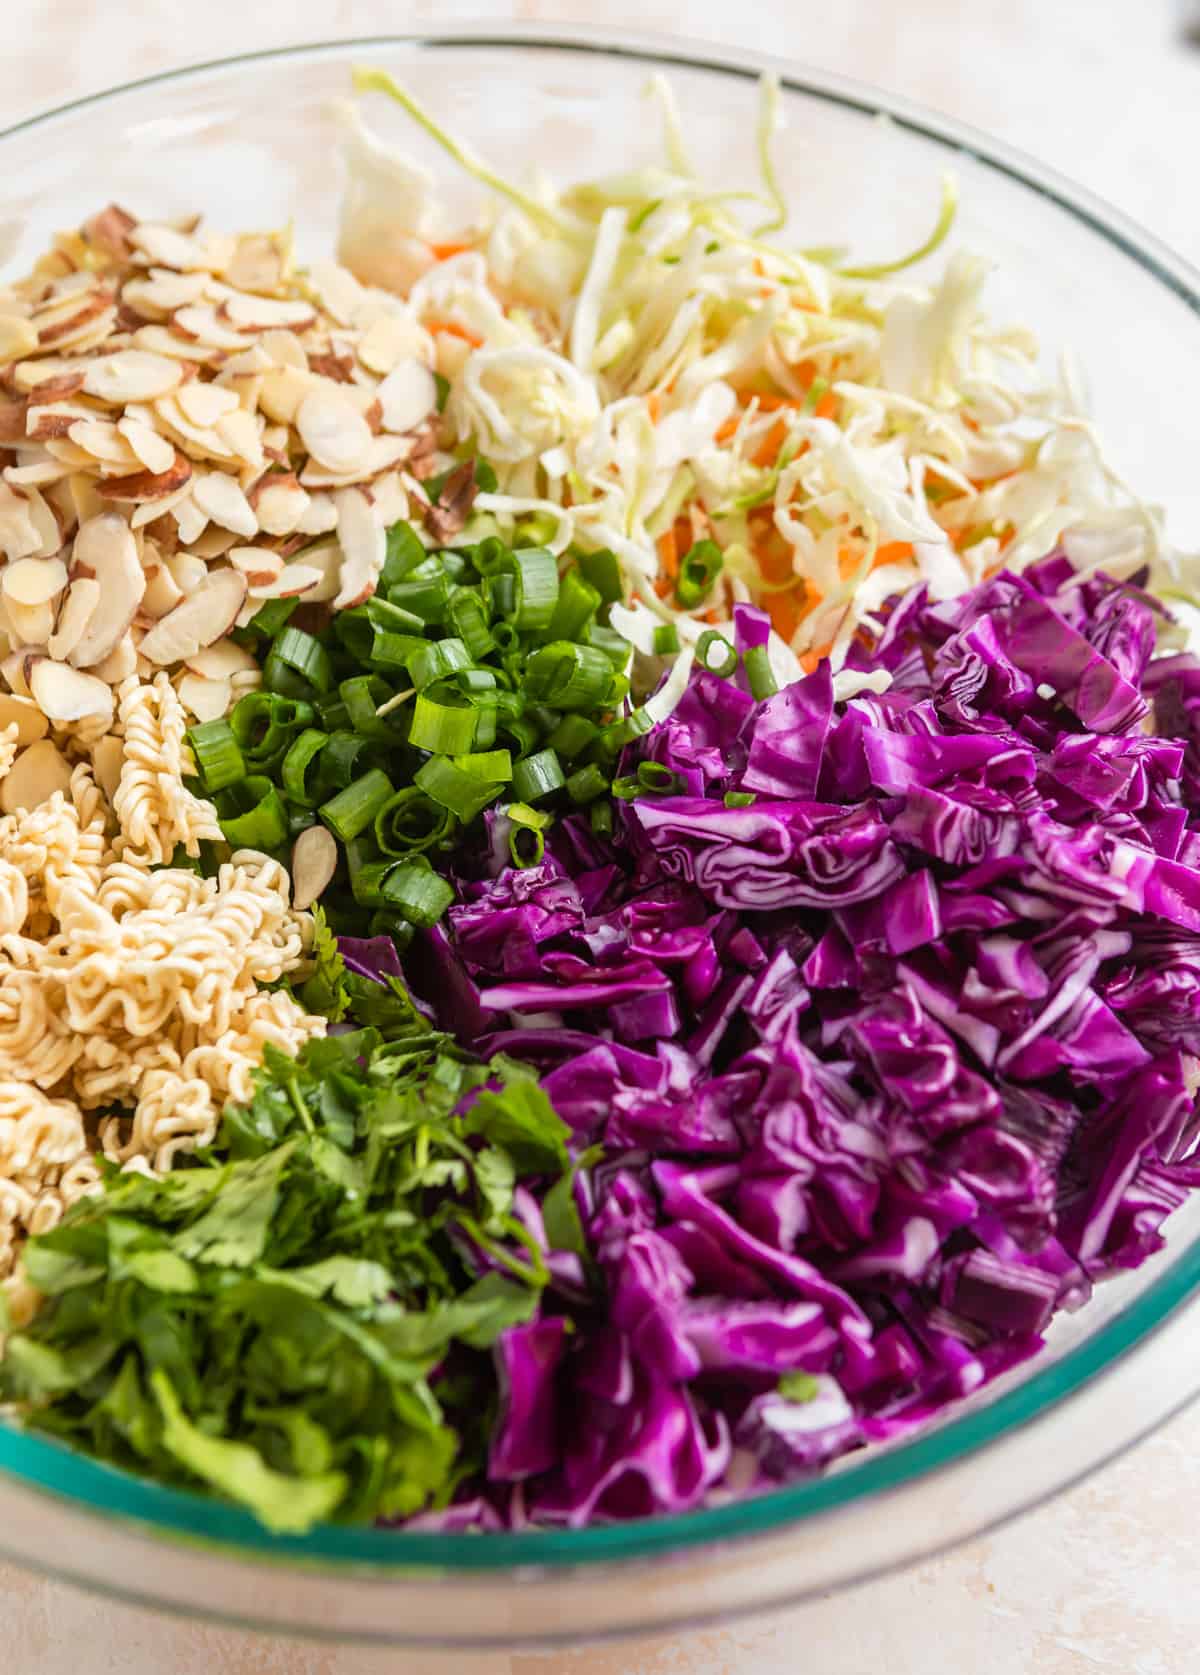 Chopped cabbage, cole slaw mix, almonds, cilantro and cole slaw mix in mixing bowl.